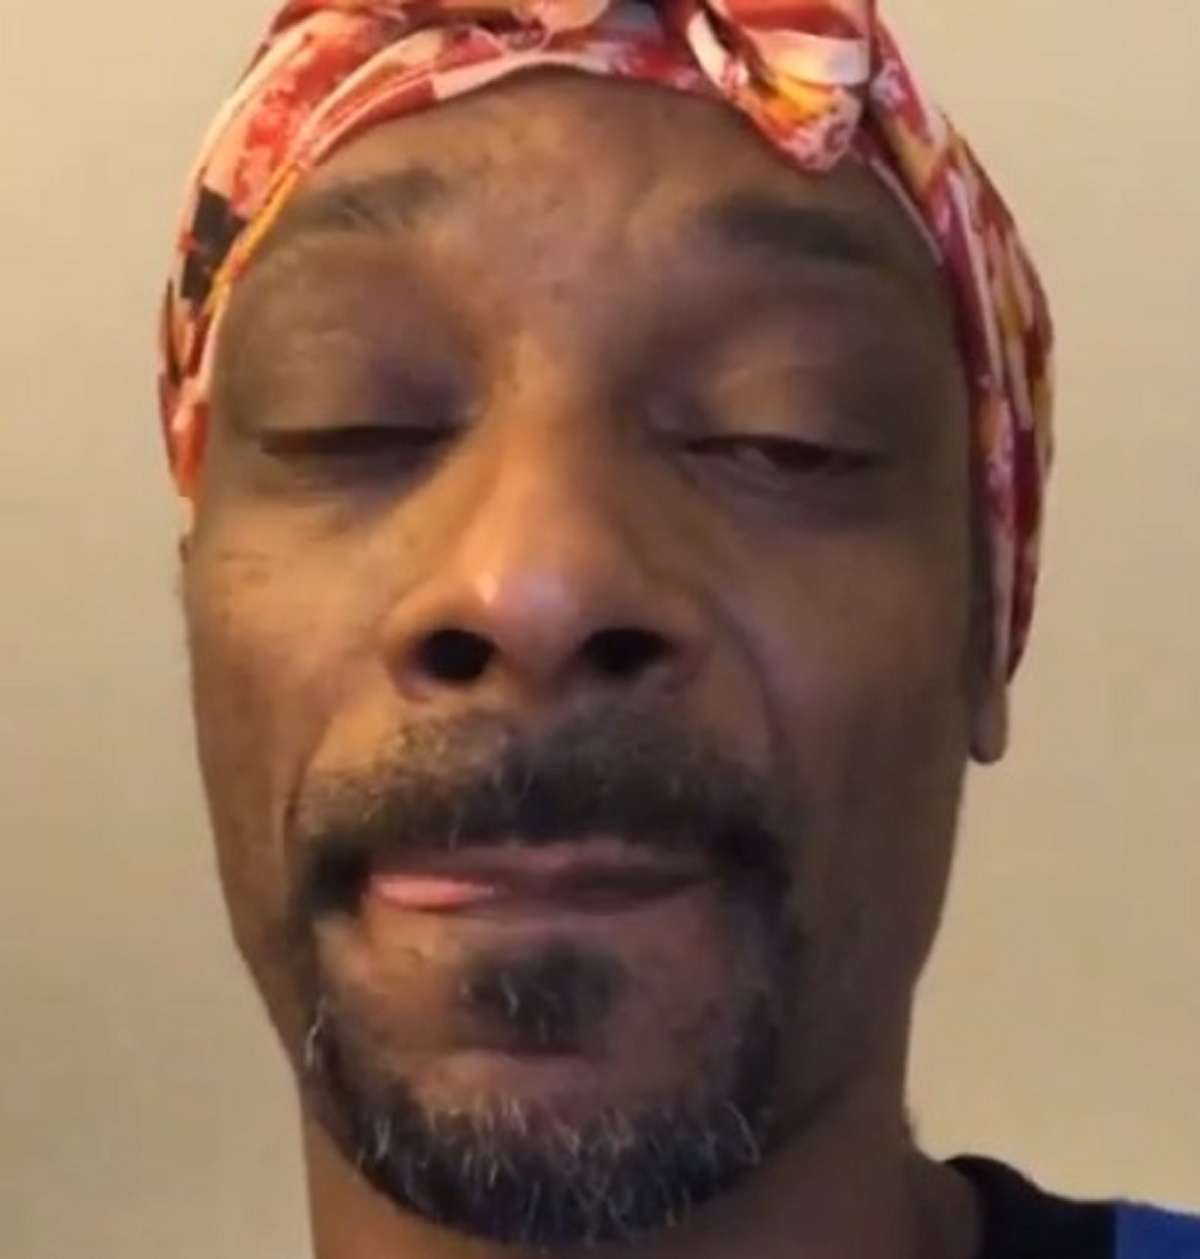 Snoop Dogg Disses Luka Doncic on Instagram for People Calling him the Best 20 Year Old Ever